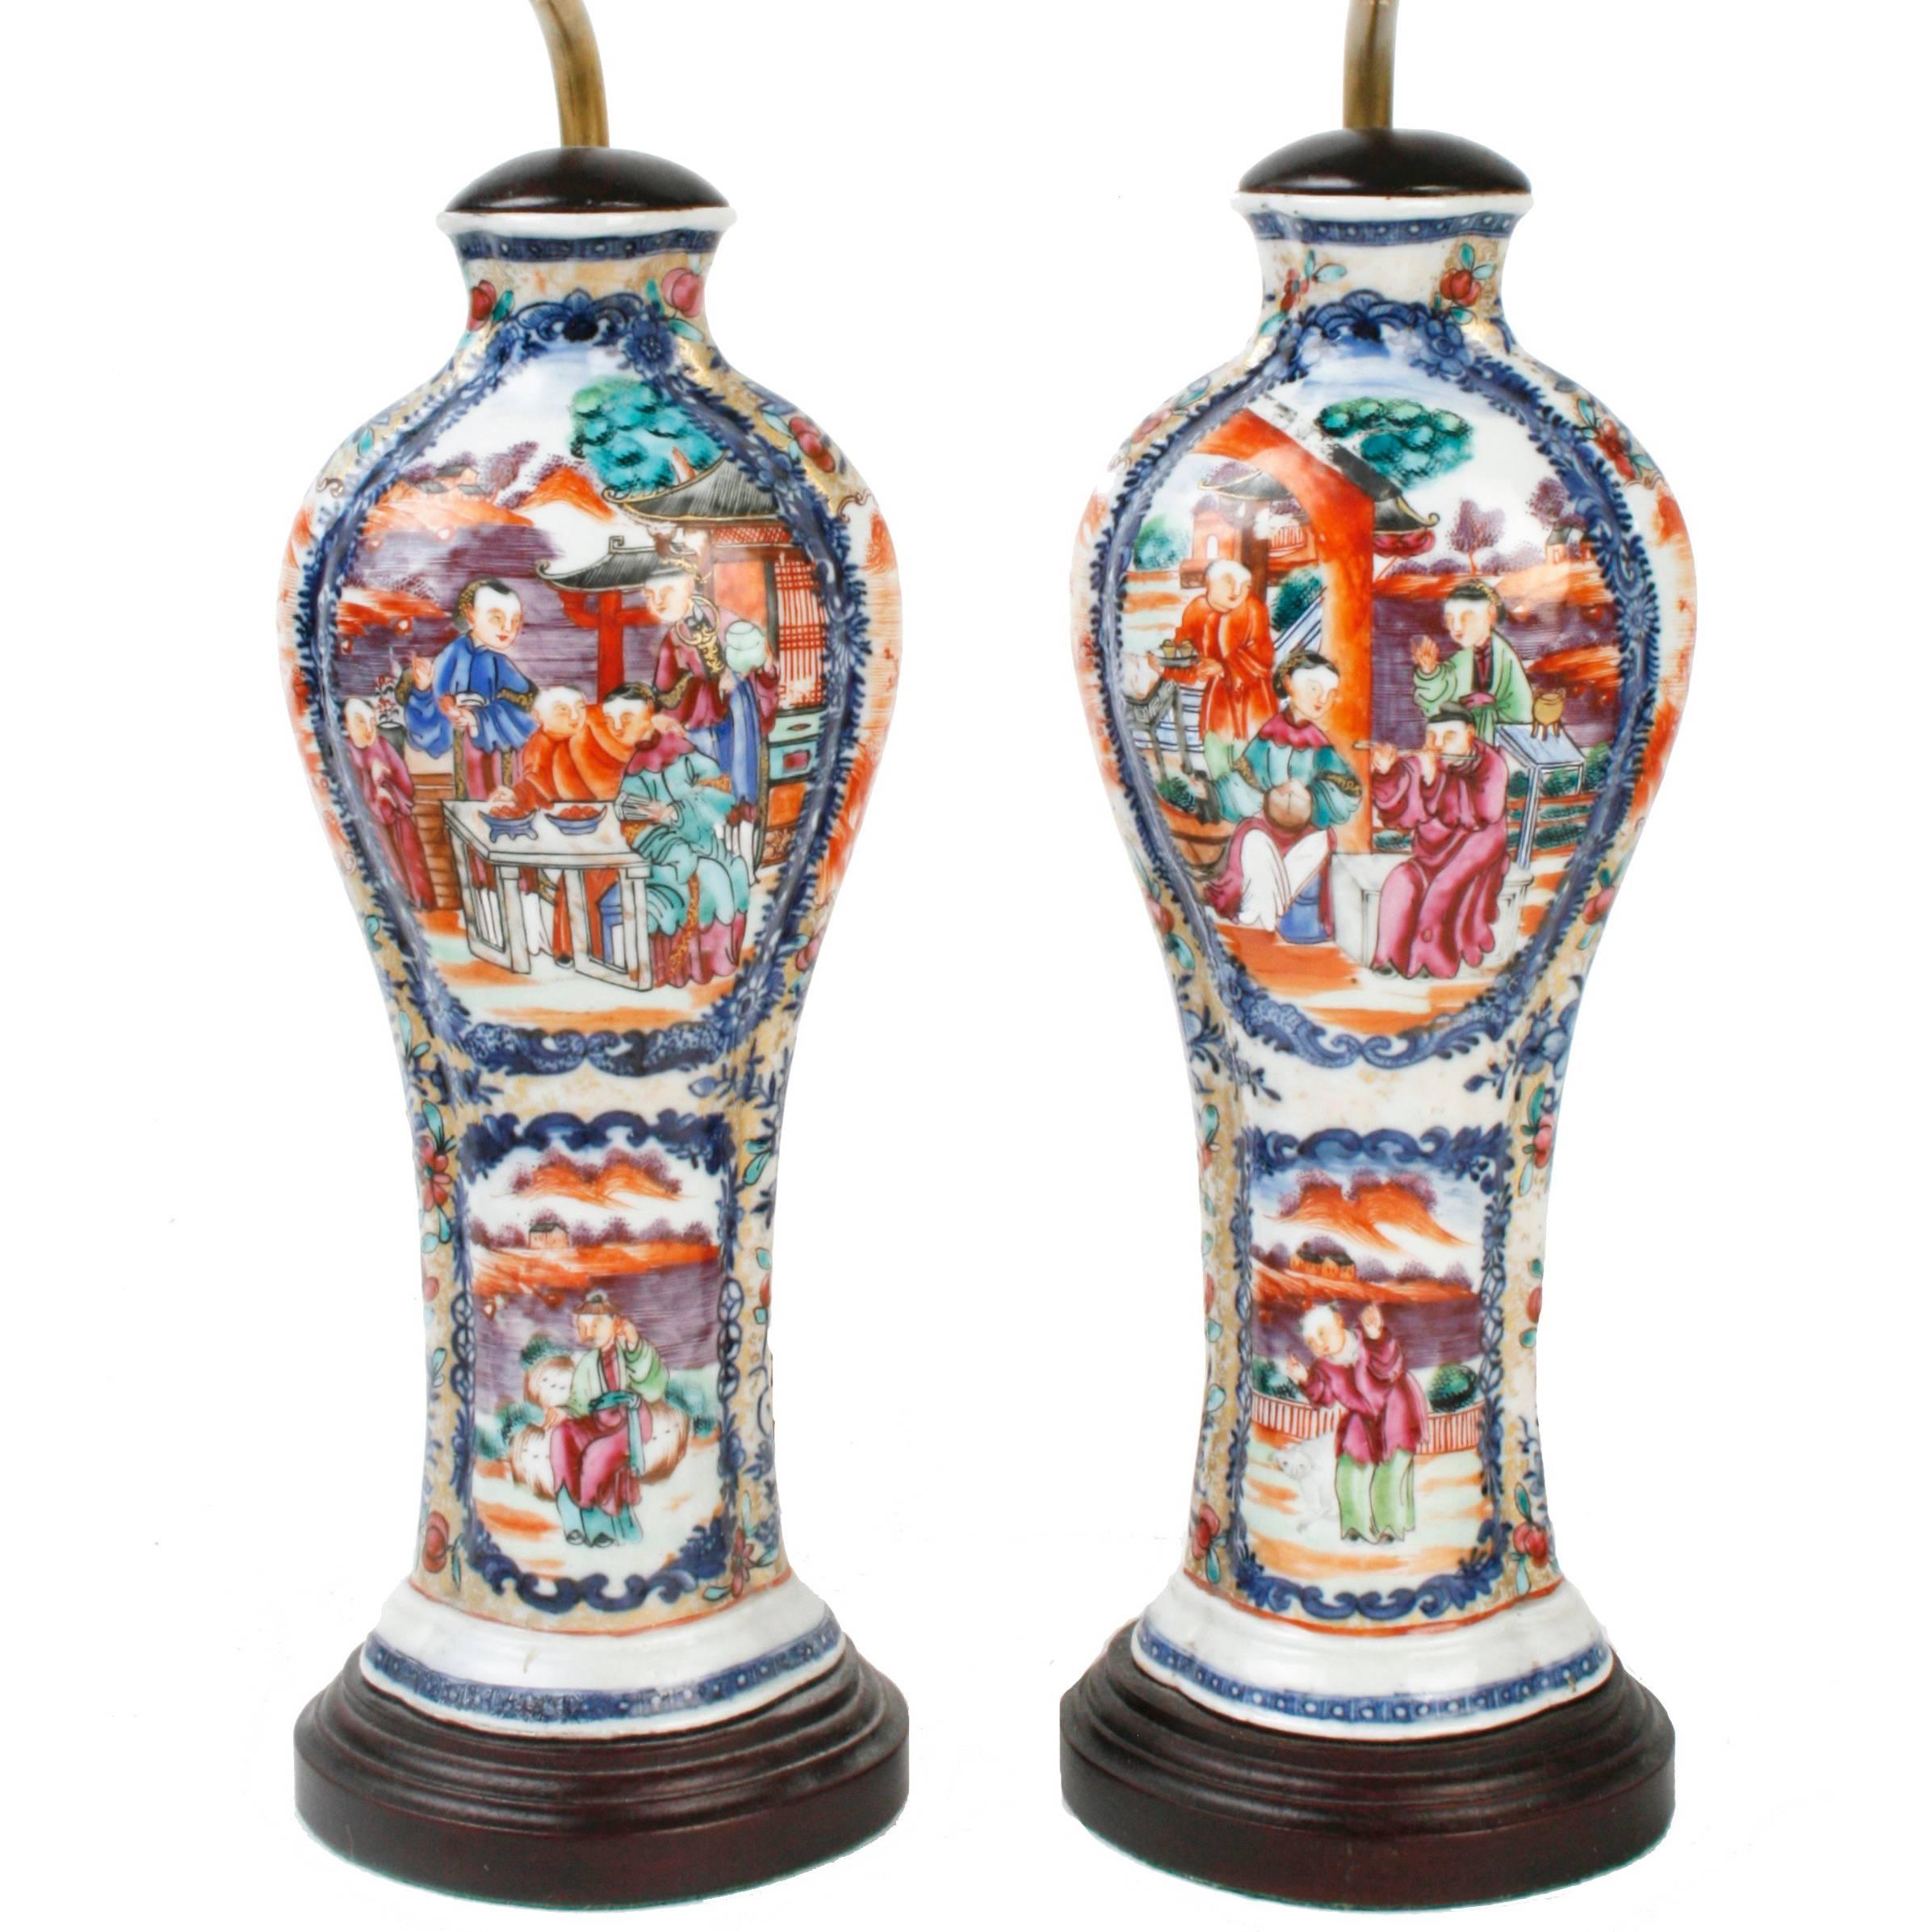 Pair of Rose Mandarin Chinese Export Vases Now as Lamps, c1800